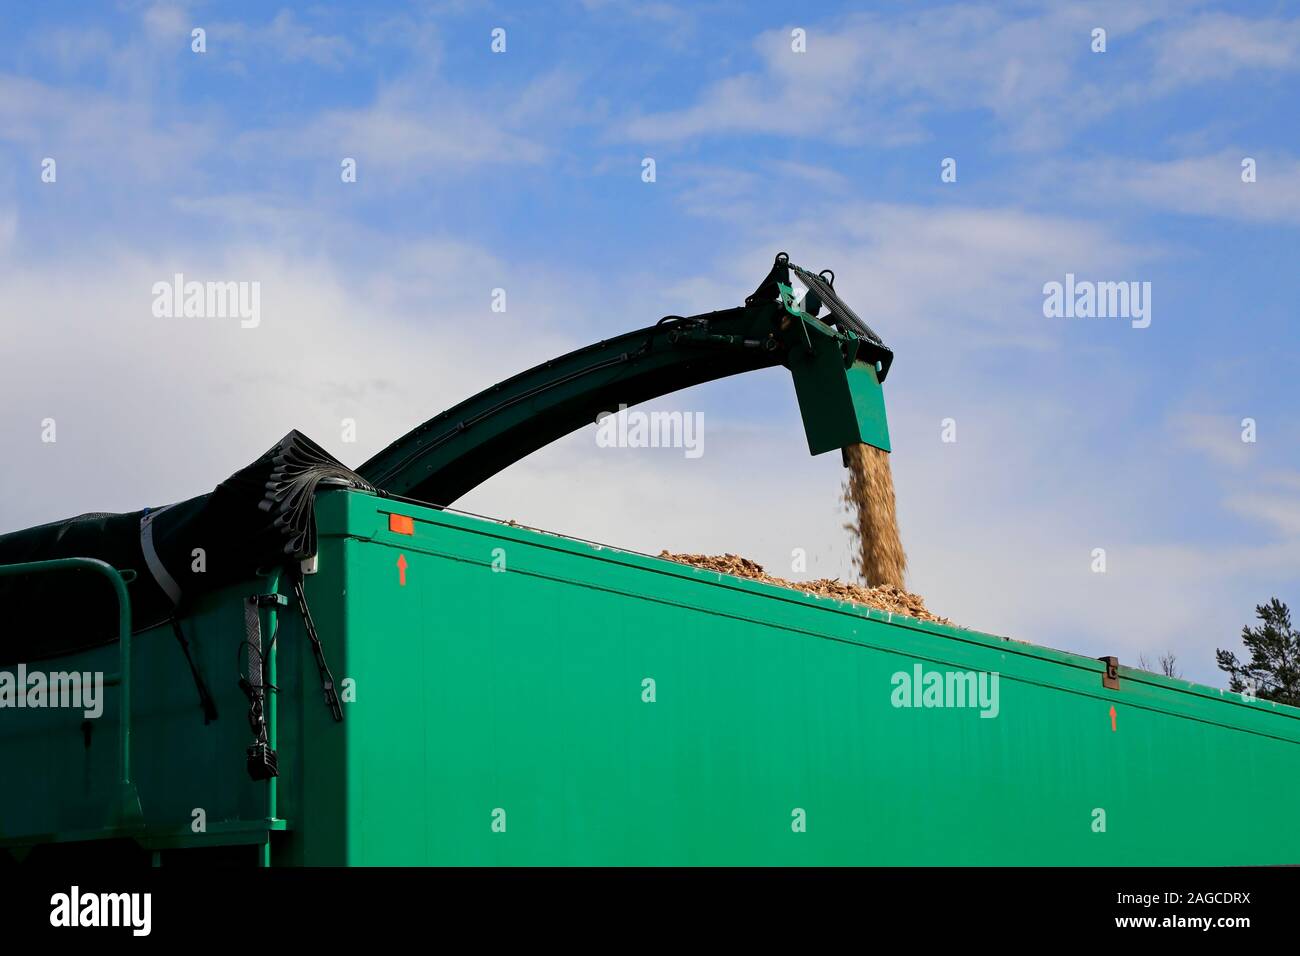 https://c8.alamy.com/comp/2AGCDRX/mobile-wood-chipper-in-action-chipping-and-loading-woodchip-onto-green-trailer-background-of-blue-sky-and-white-clouds-copy-space-top-of-image-2AGCDRX.jpg